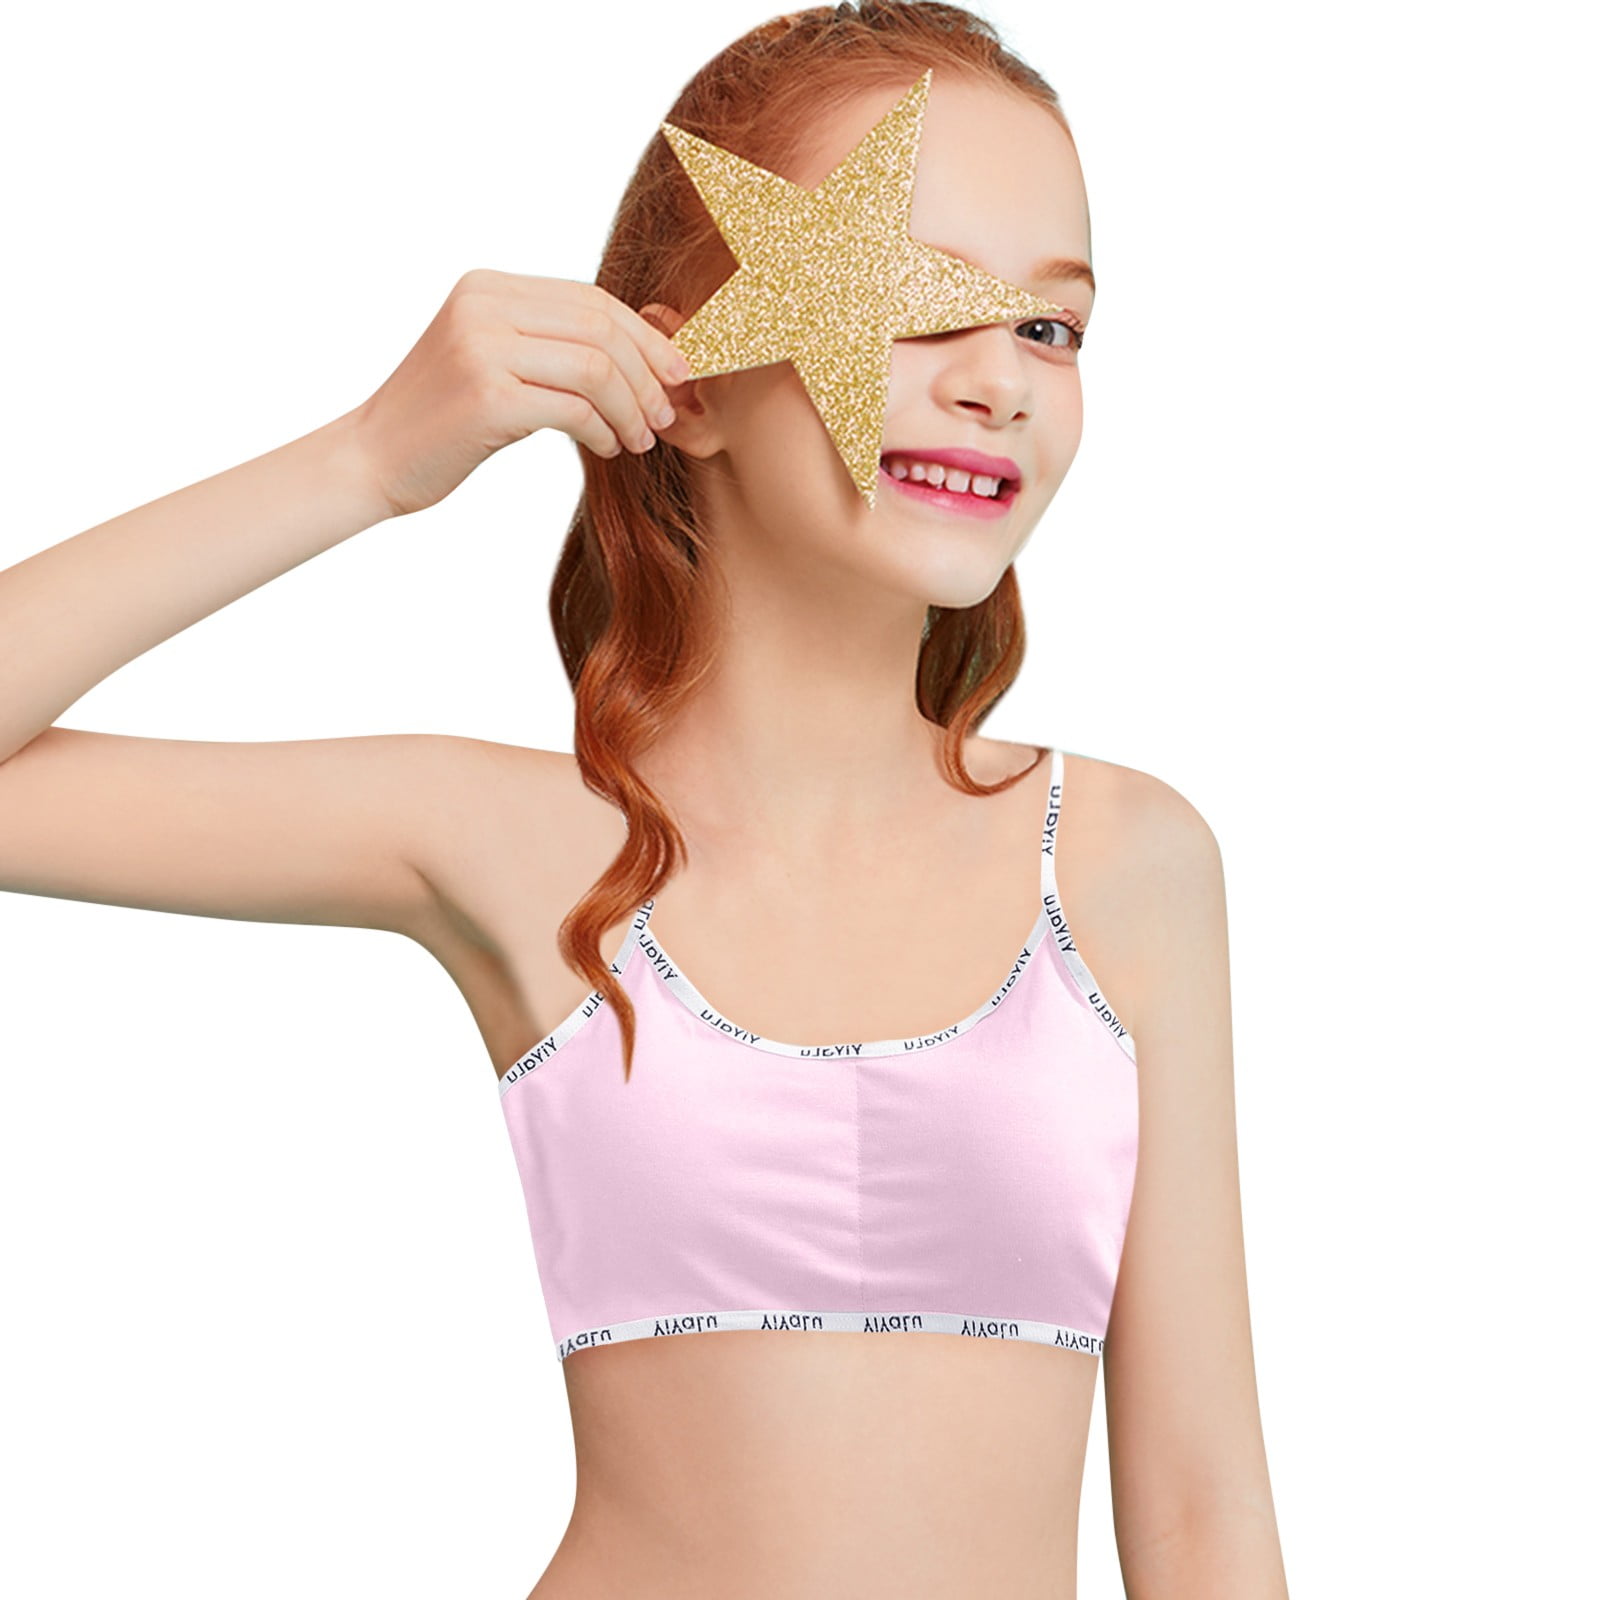 Seamless Underwear For Teens And Kids Bras For Older Women Tops For Sport  Training And Lingerie Ages 12 13 From Almetag, $5.62